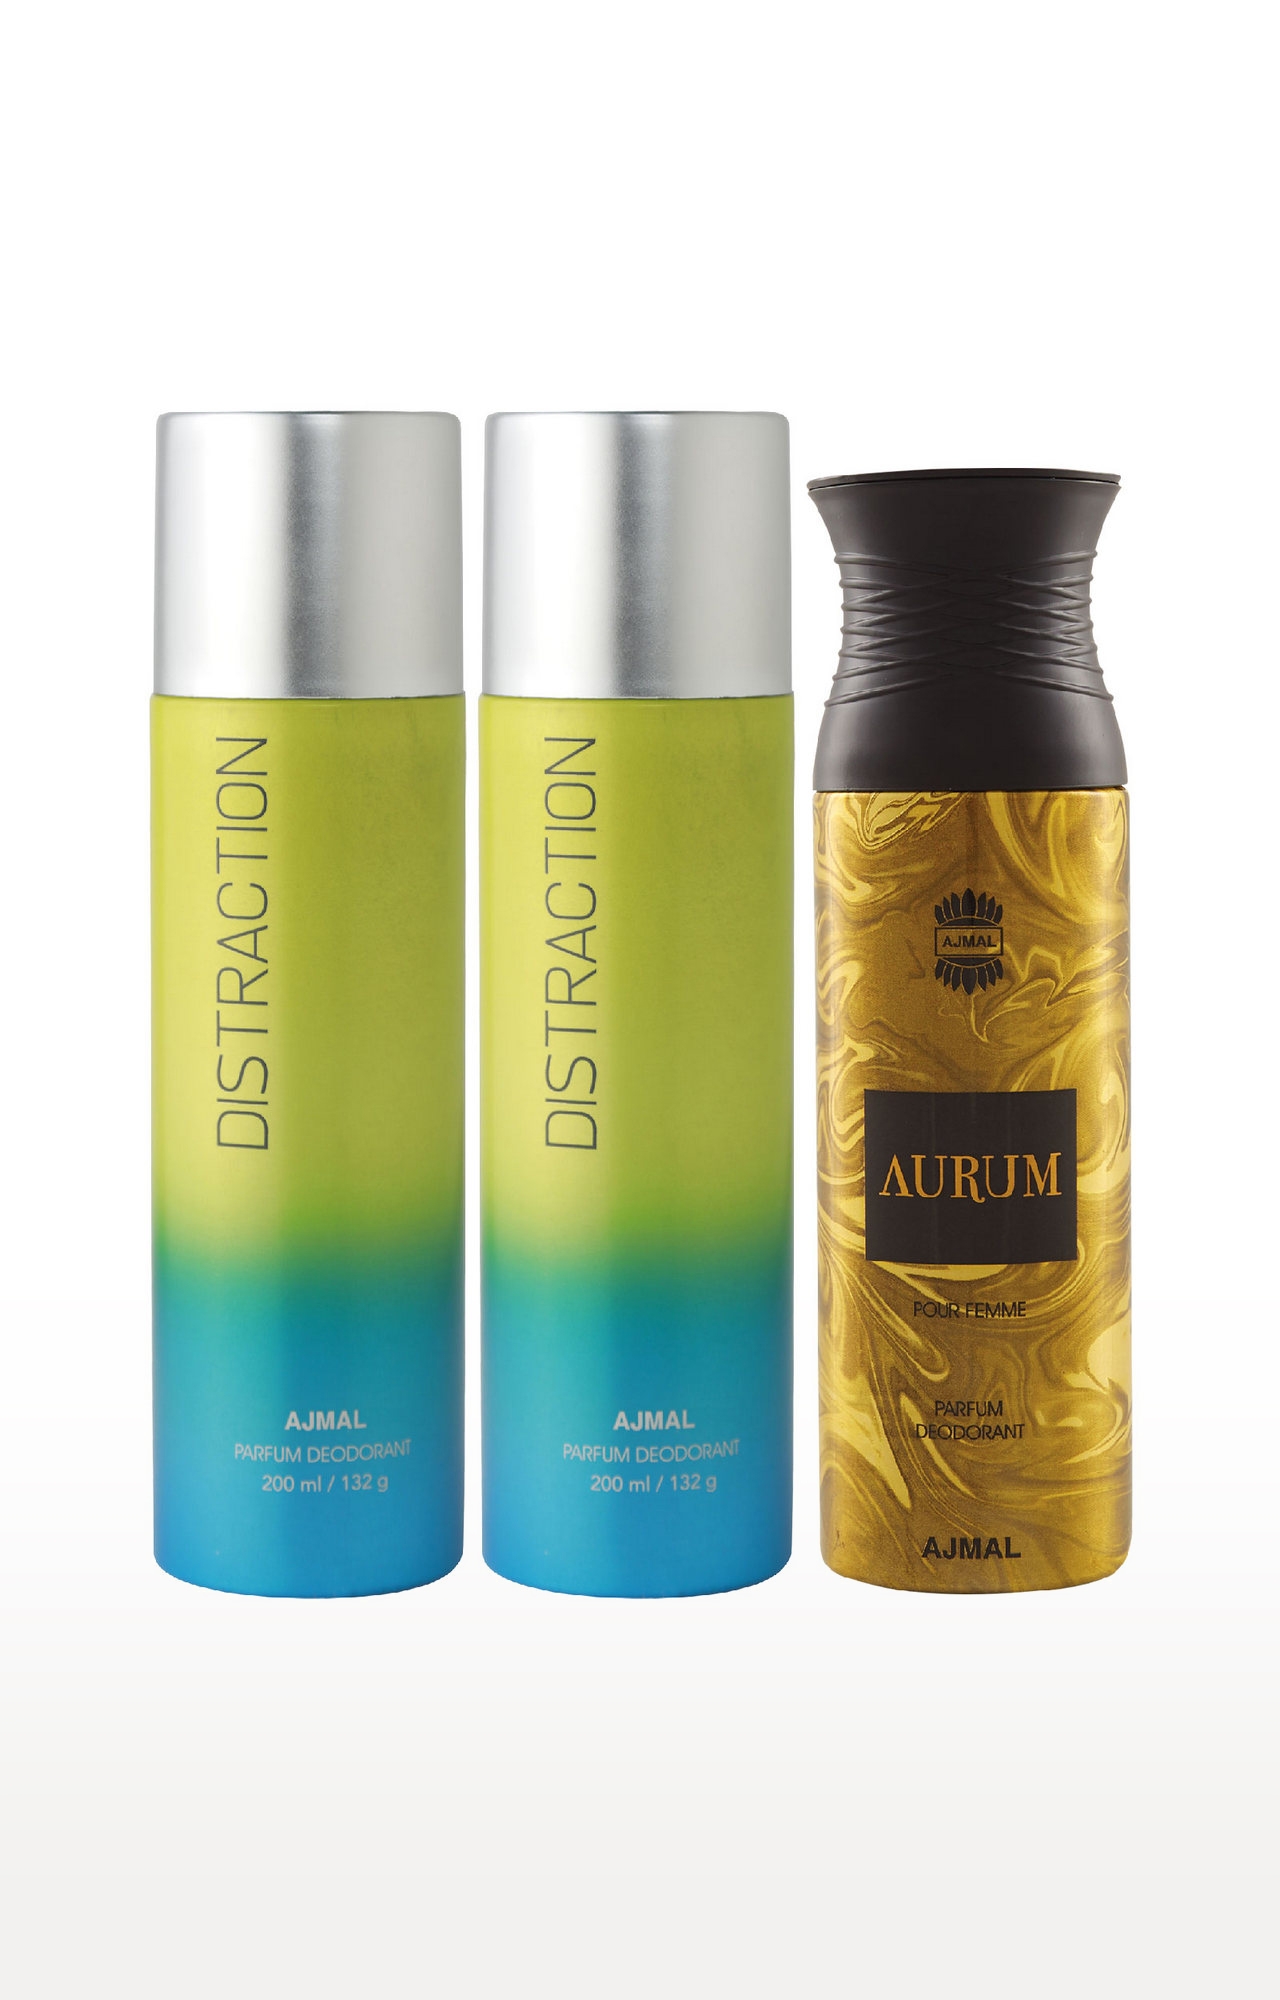 Ajmal | Ajmal 2 Distraction for Men & Women and 1 Aurum Femme for Women High Quality Deodorants each 200ML Combo pack of 3 (Total 600ML) + 3 Parfum Testers